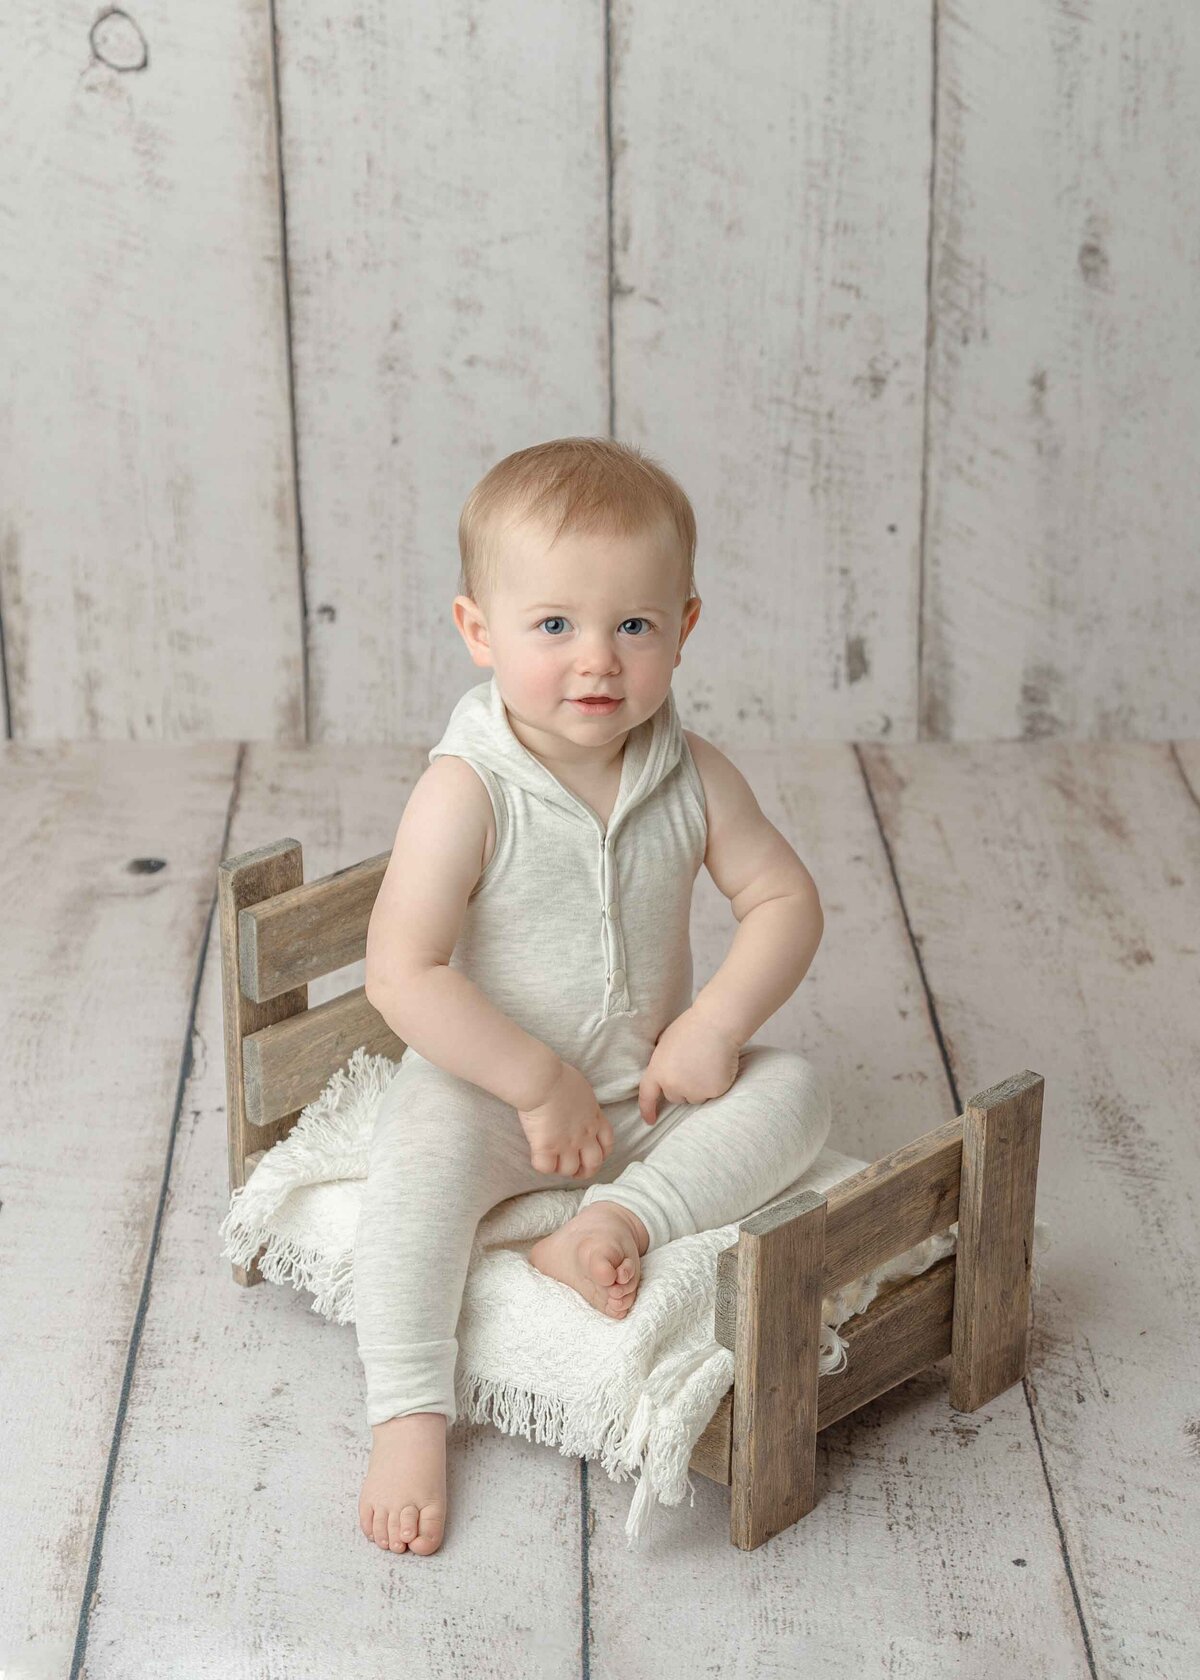 One year old boy sitting on small wood bed, dressed in oatmeal colored outfit